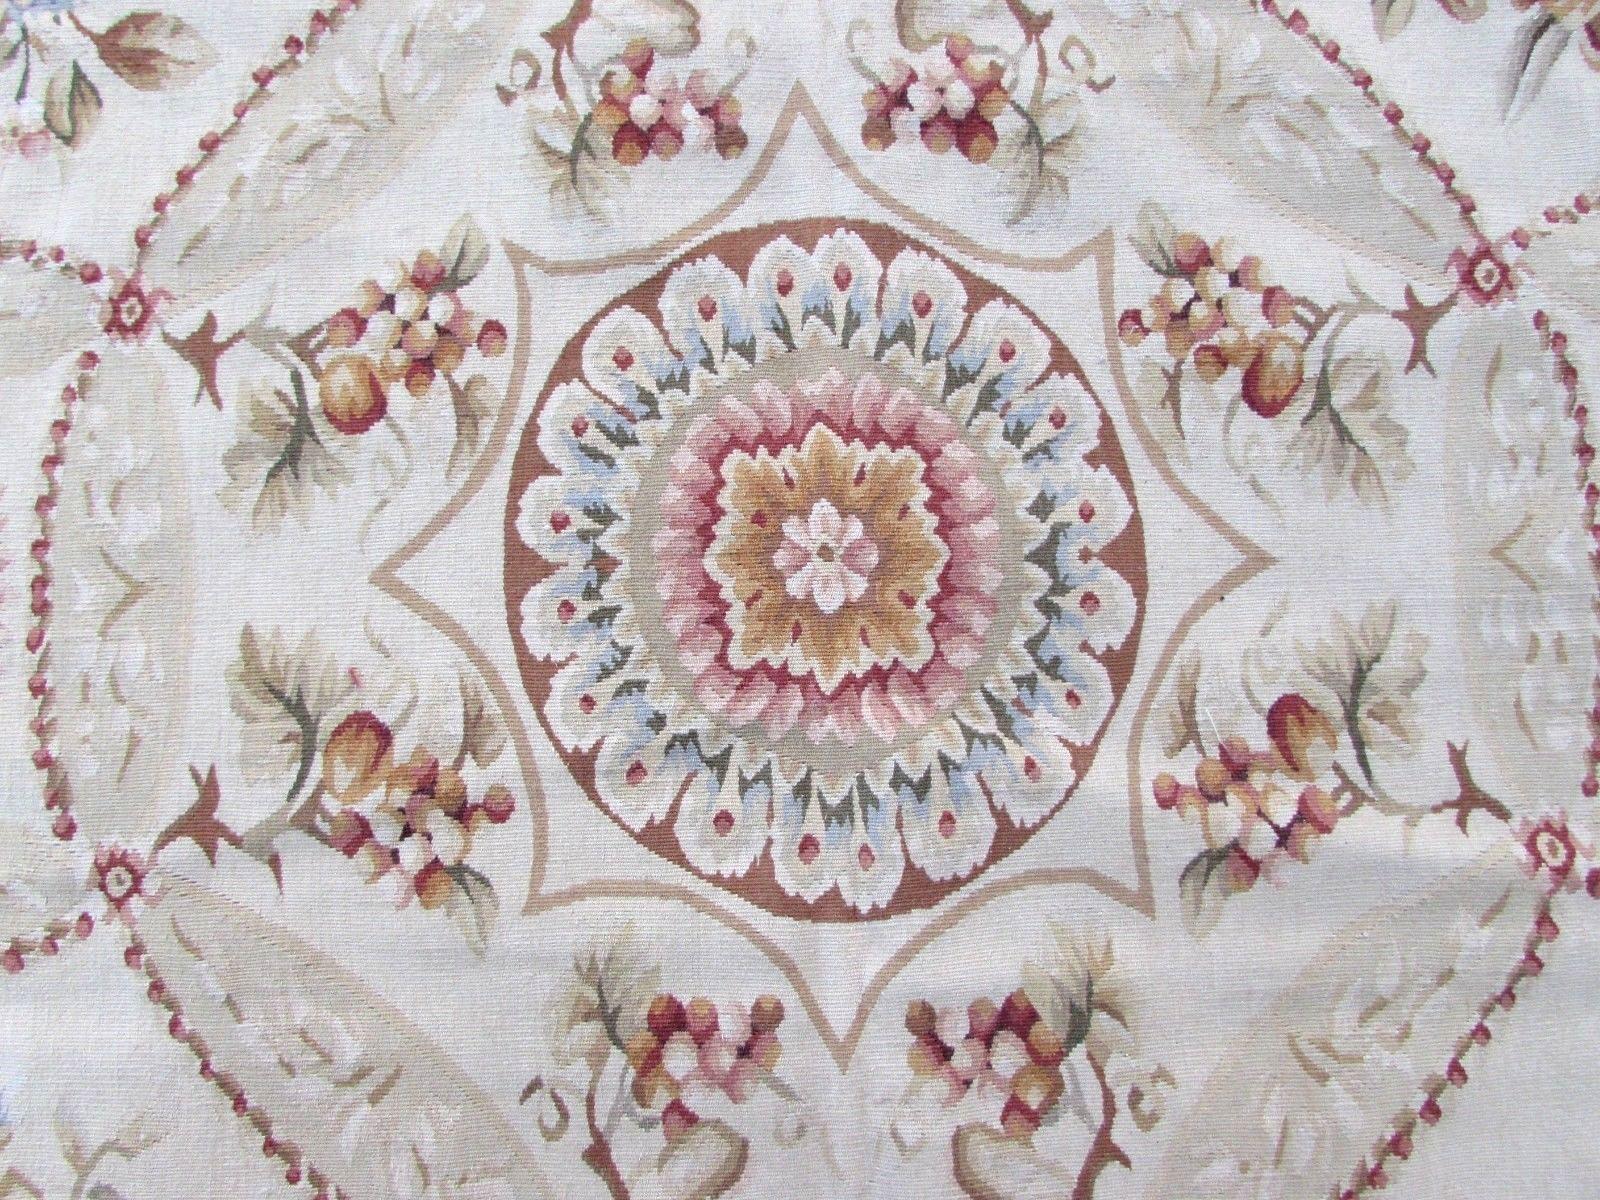 Handmade vintage French Aubusson rug in wool. This rug has been made in the end of the 20th century, it is in original good condition.

- Condition: original good,

- circa: 1970s,

- Size: 7.11' x 10.4' (238cm x 310cm),

- Material: